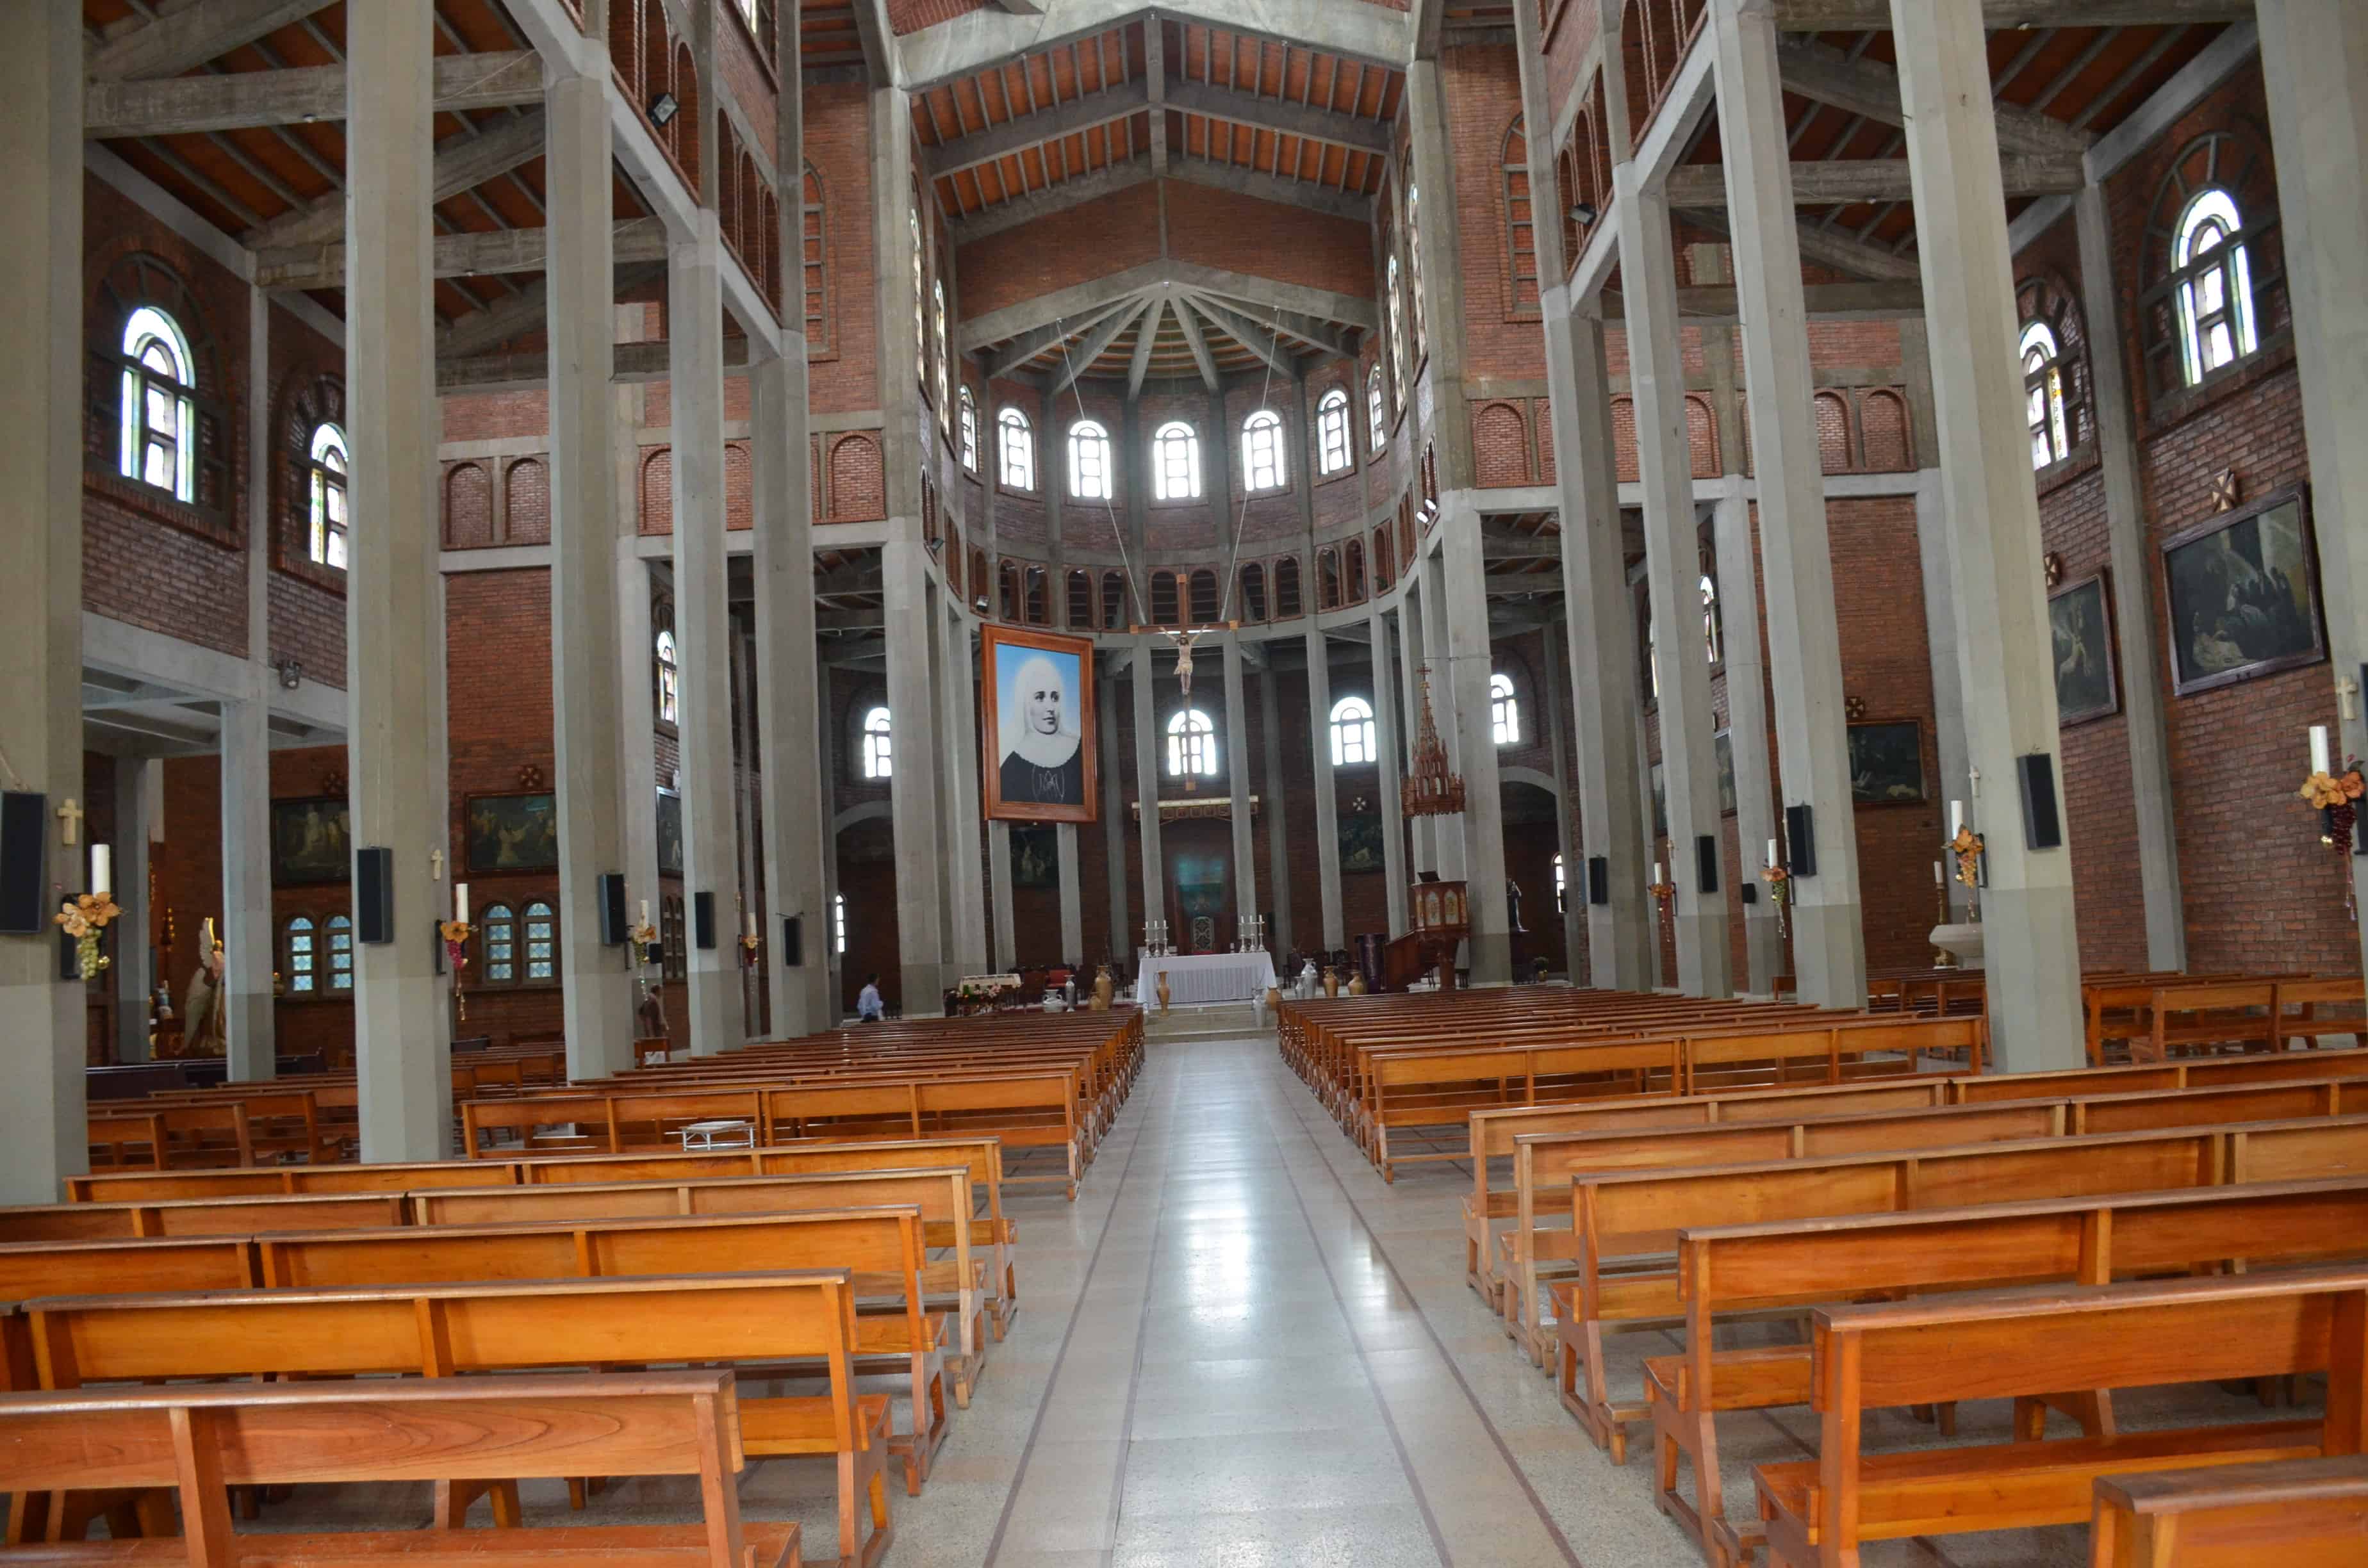 Nave of the Cathedral of Our Lady of Mercy